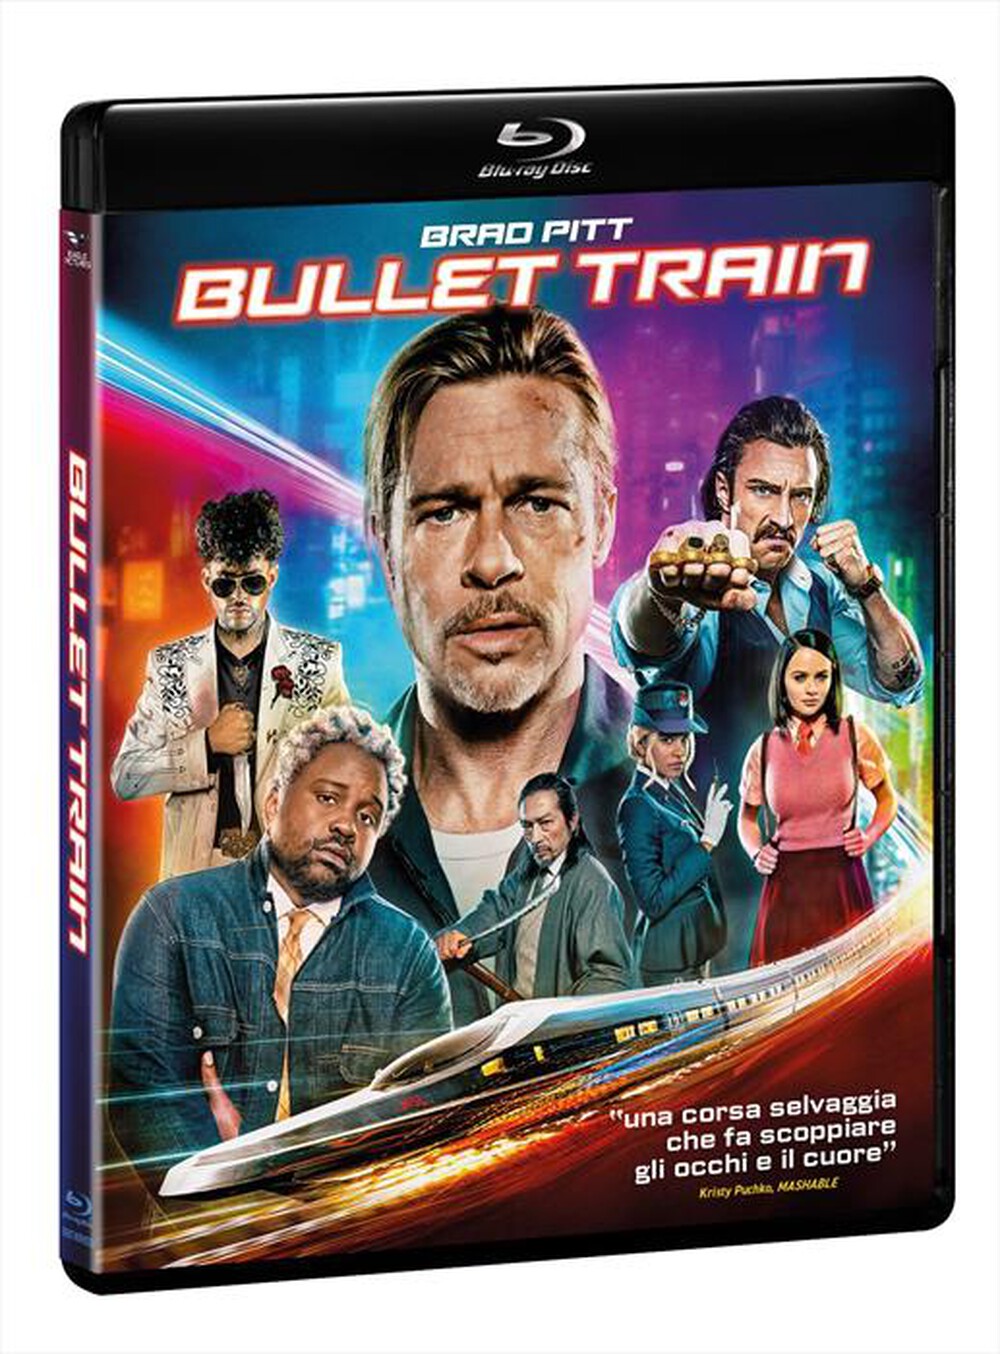 "SONY PICTURES - Bullet Train (Blu-Ray+Card)"